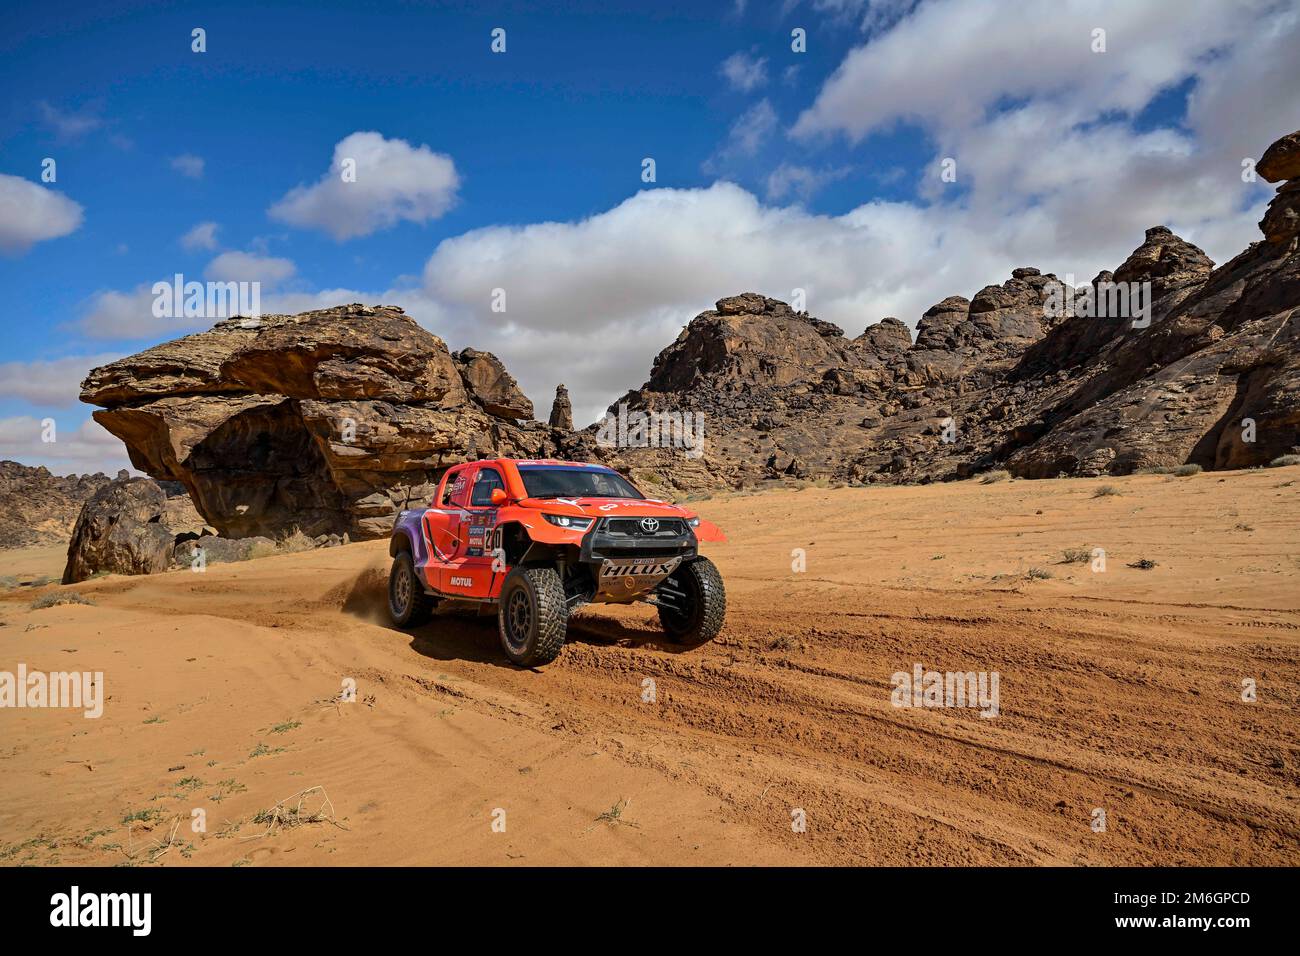 Arabia. 04th Jan, 2023. 230 MORAES Lucas GOTTSCHALK Timo (ger), Overdrive Racing, Toyota Hilux, Auto, action during the Stage 4 of the Dakar 2023 around Haïl, on January 4th, 2023